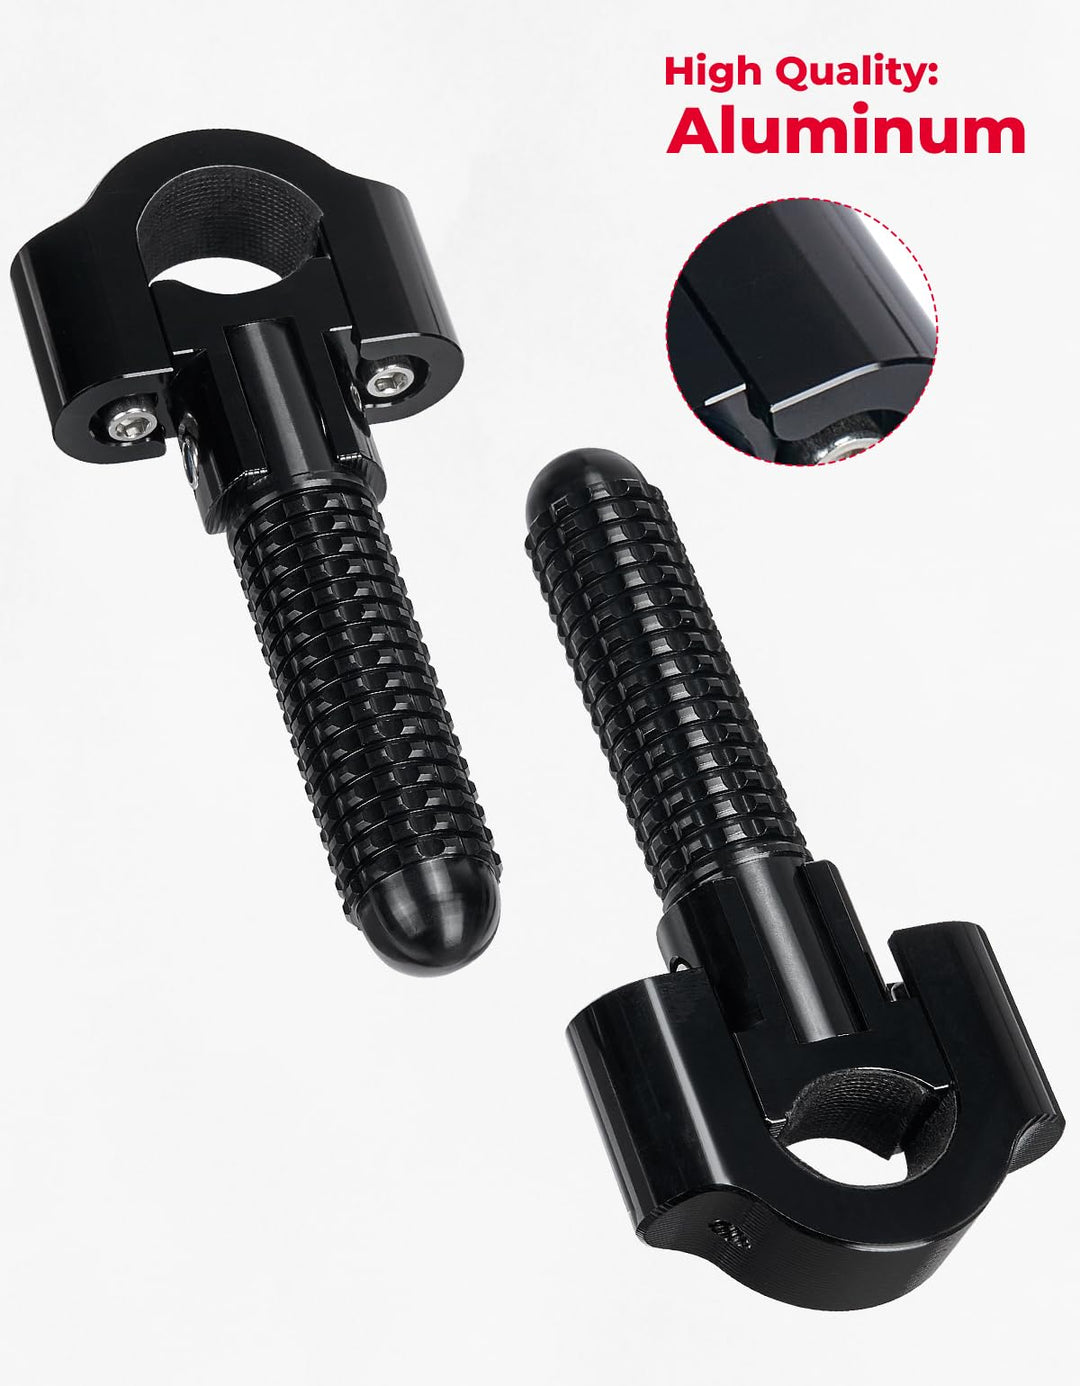 Universal Motorcycle Foldable Foot Pegs